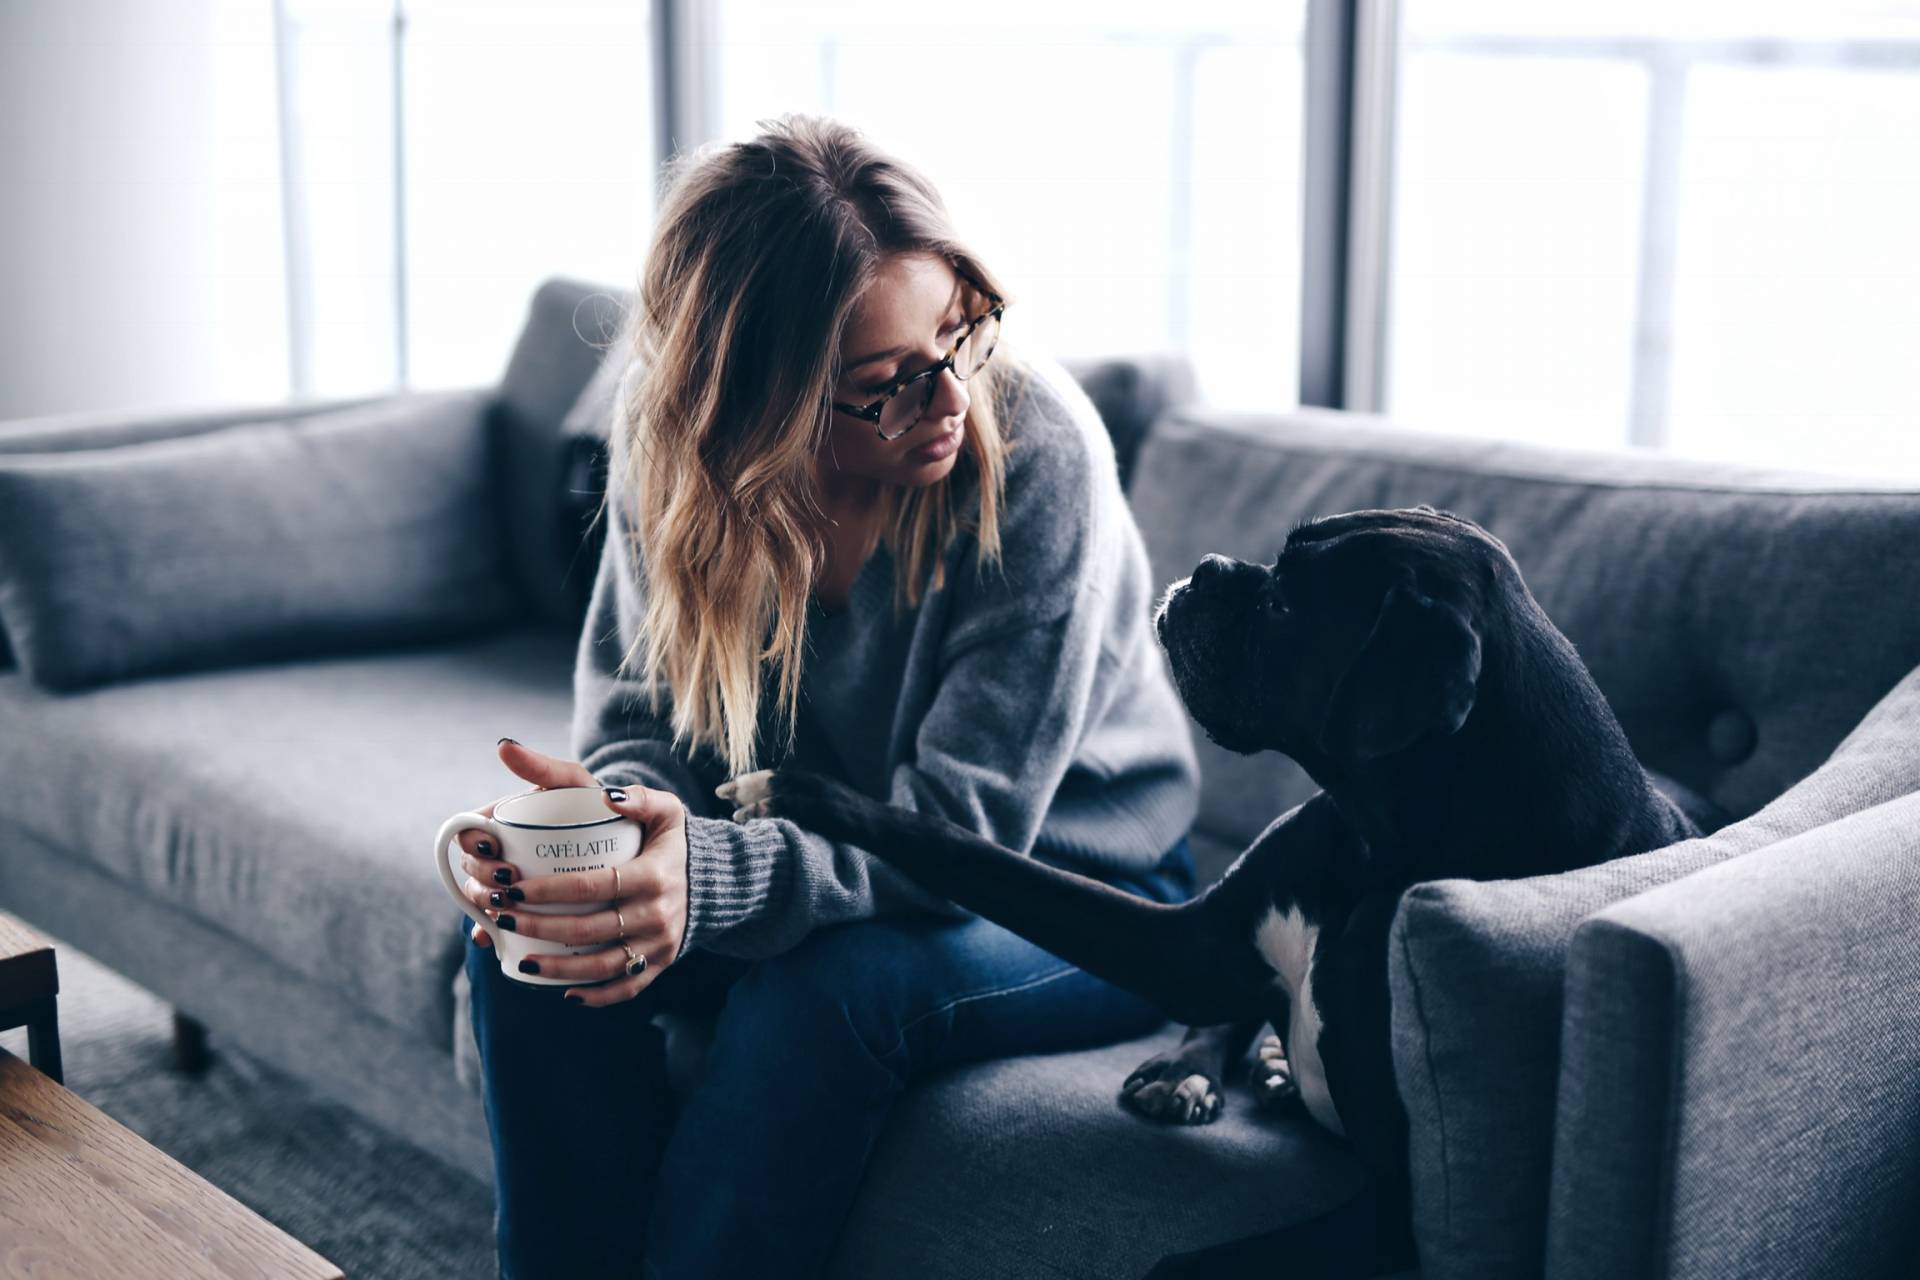 Style and beauty blogger Jill Lansky of The August Diaries shares her simple and minimalist apartment, grey couch, bonlook glasses, black boxer